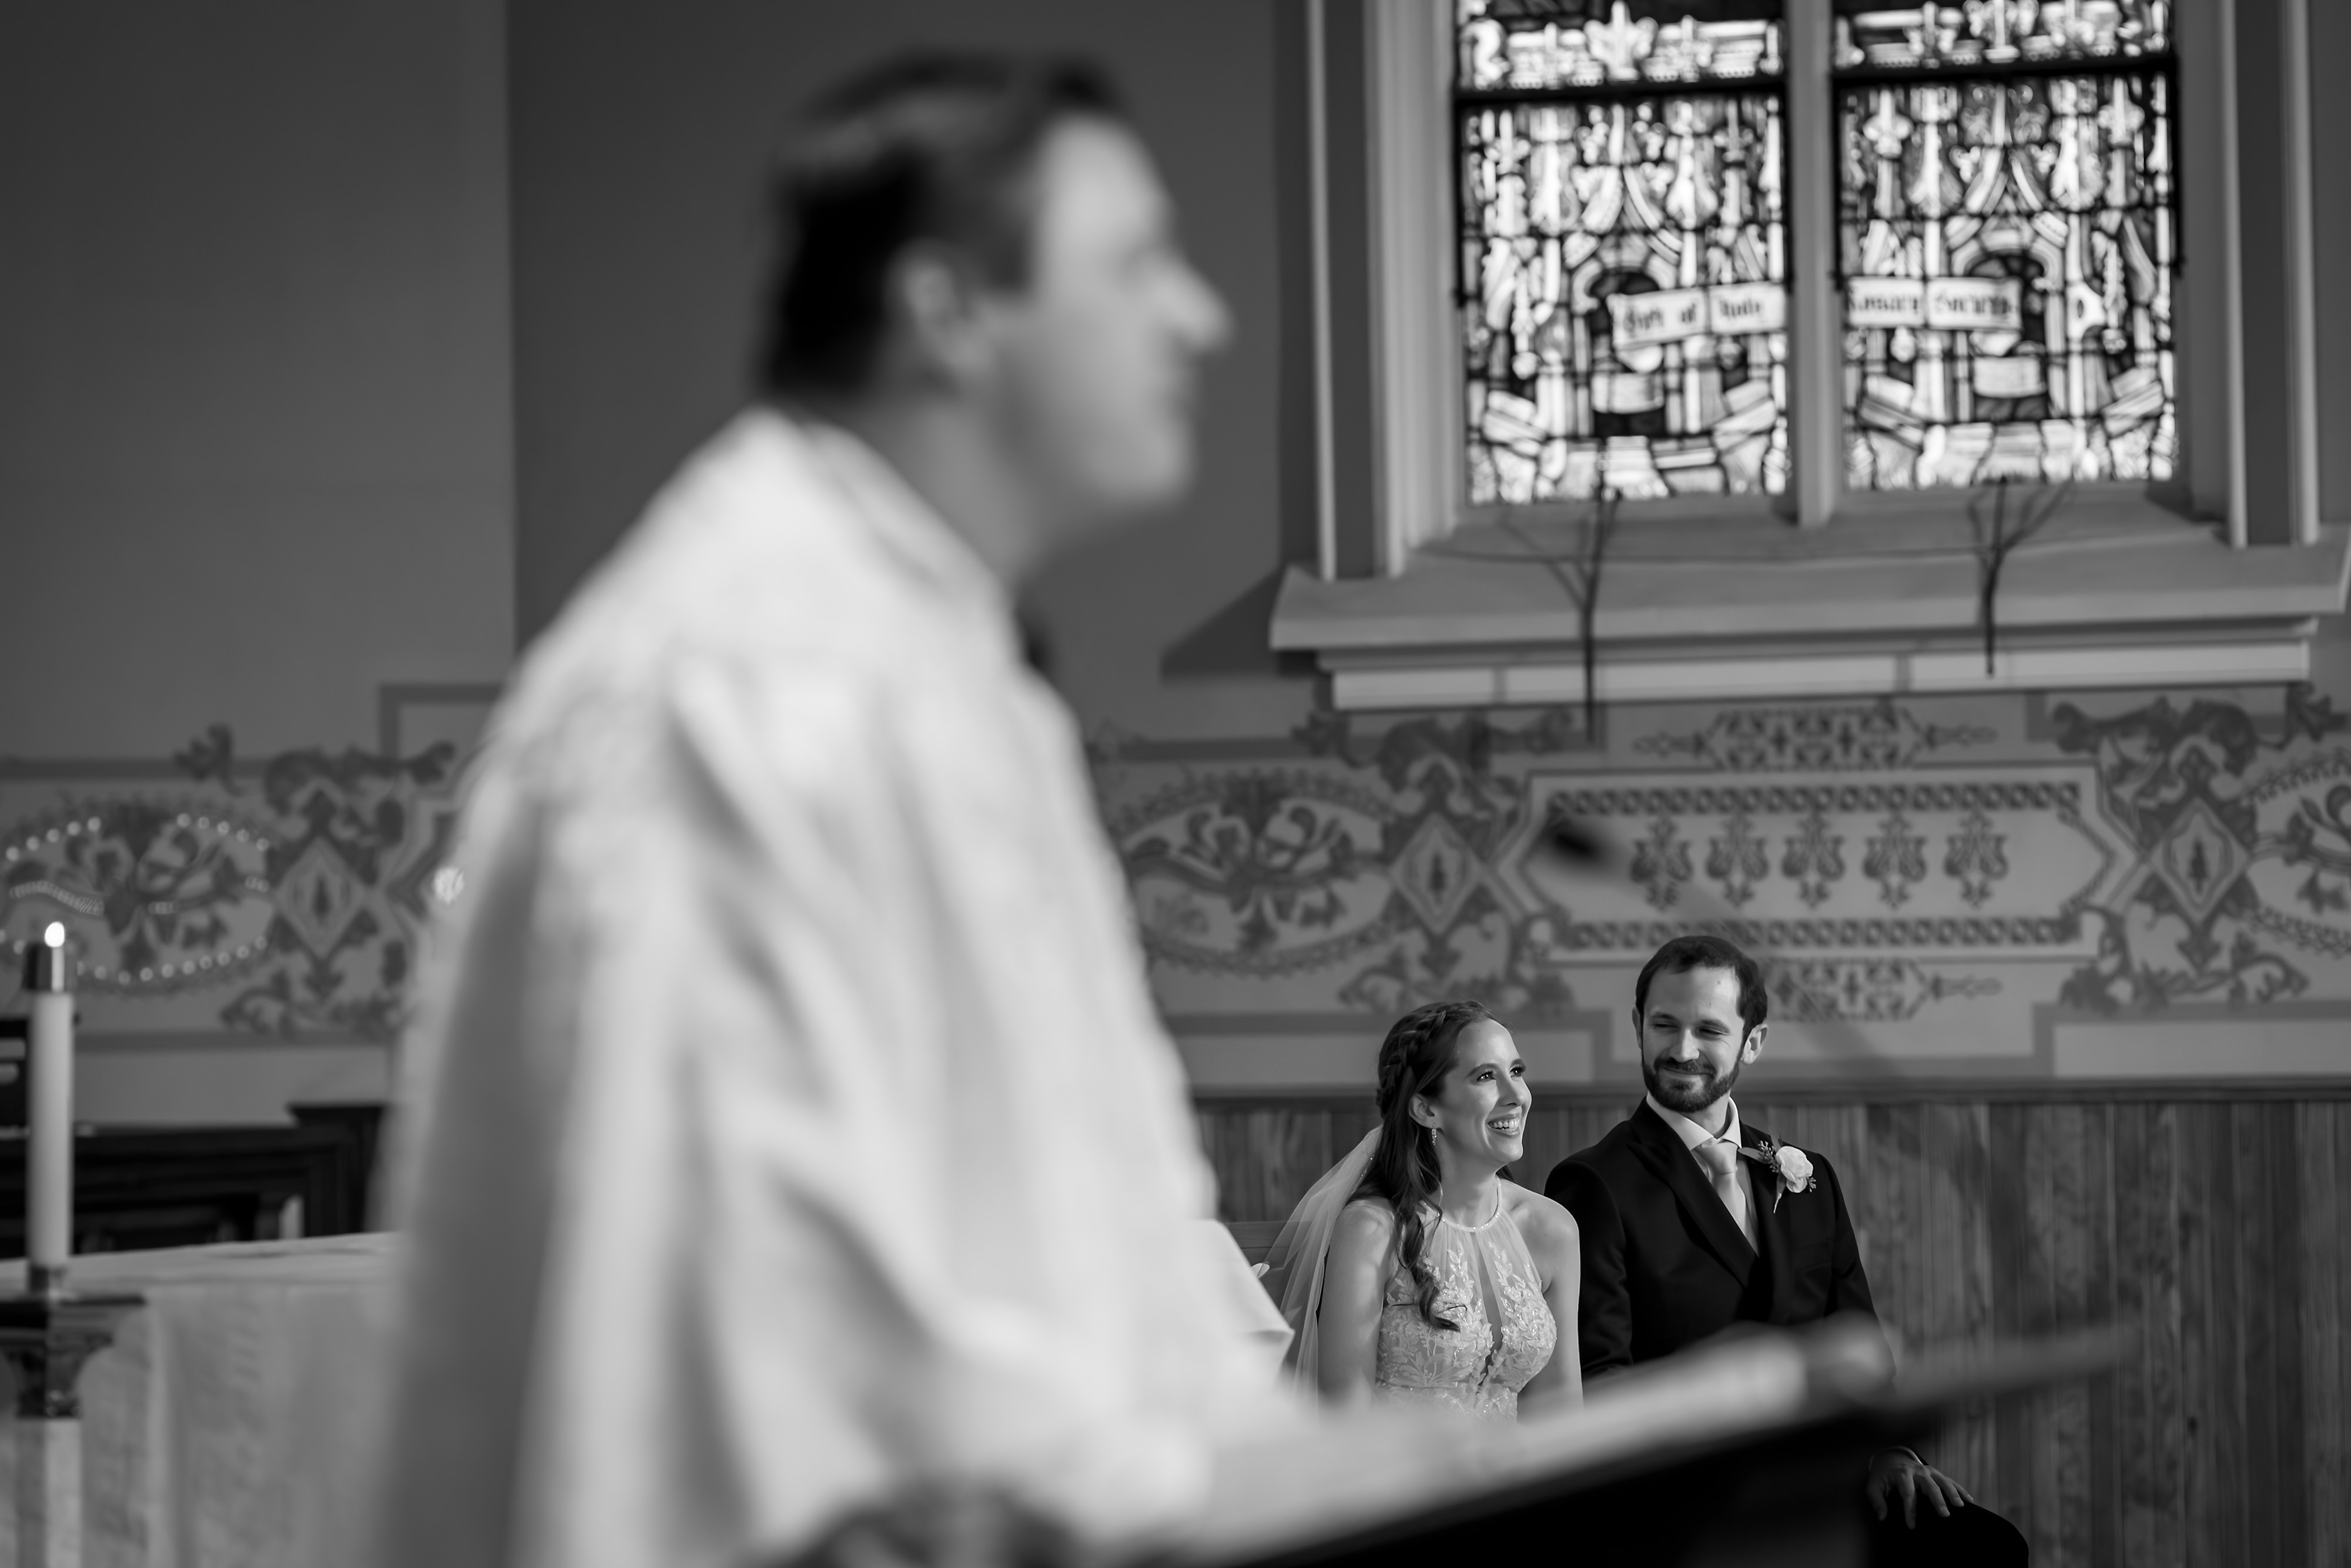 Bride and groom smile at each other during wedding ceremony at  St. Joseph Catholic Church in Chicago